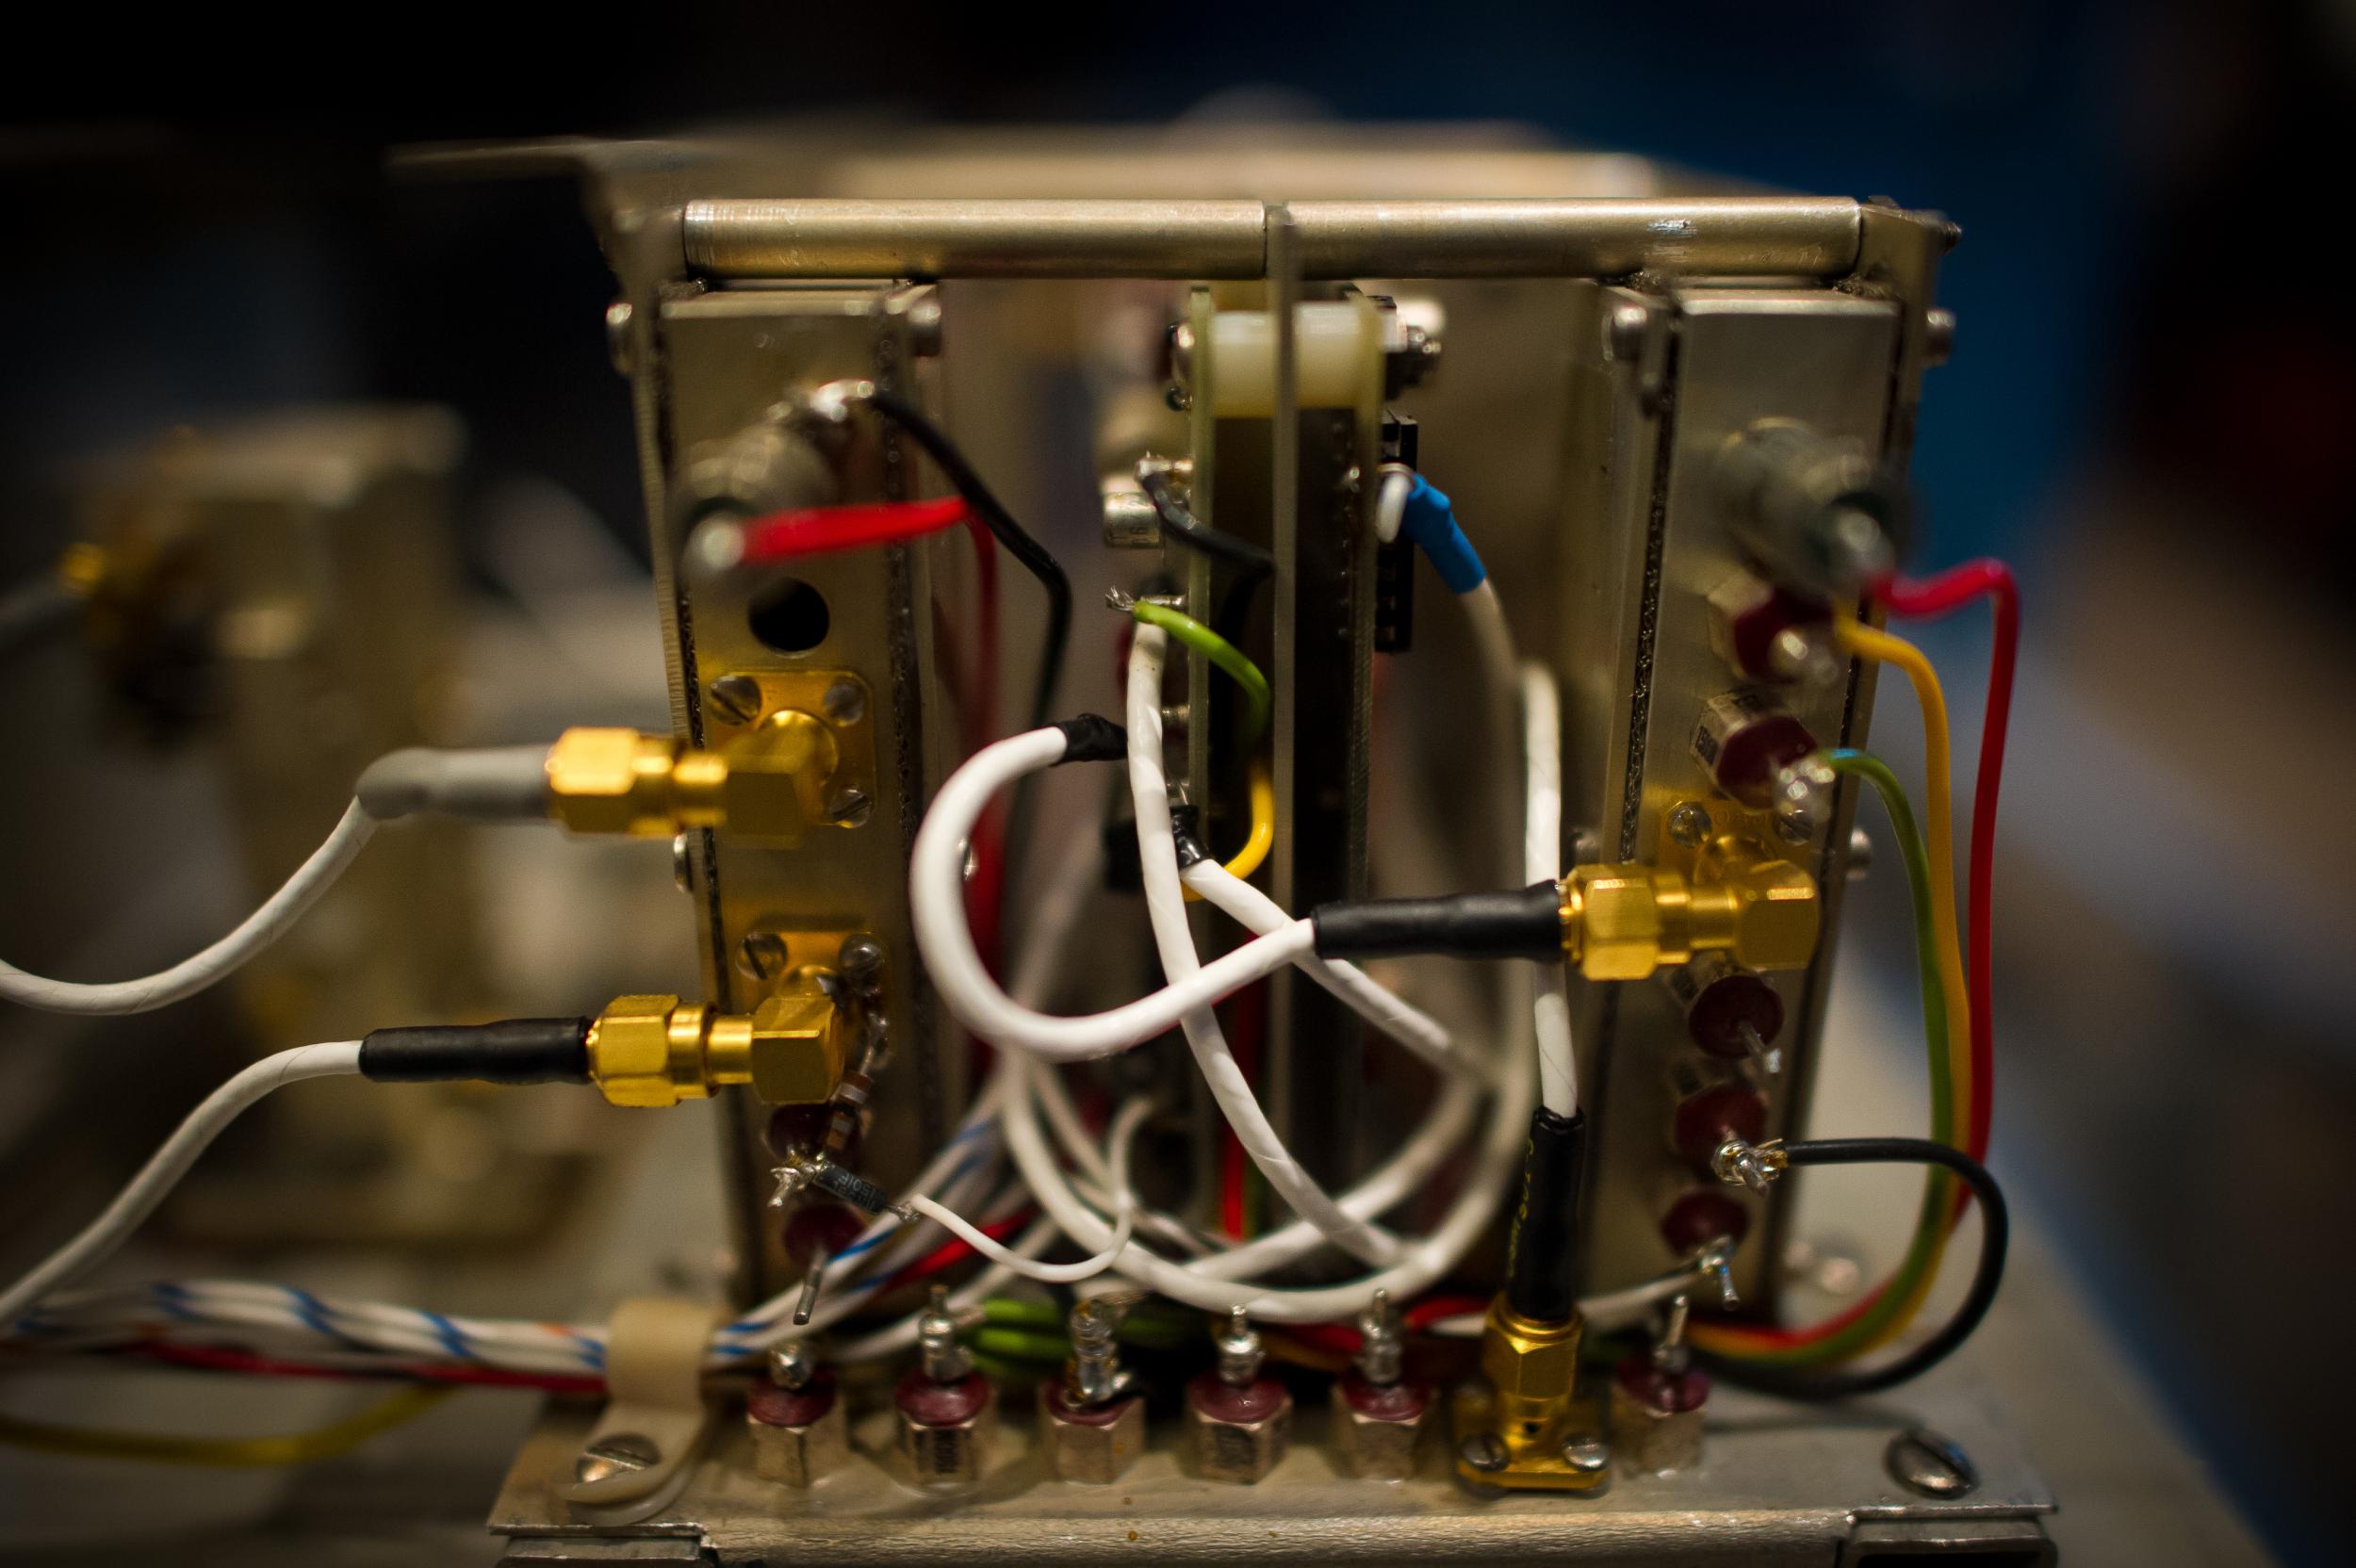 The materials can be used to create tiny atomic clocks the size of microchips